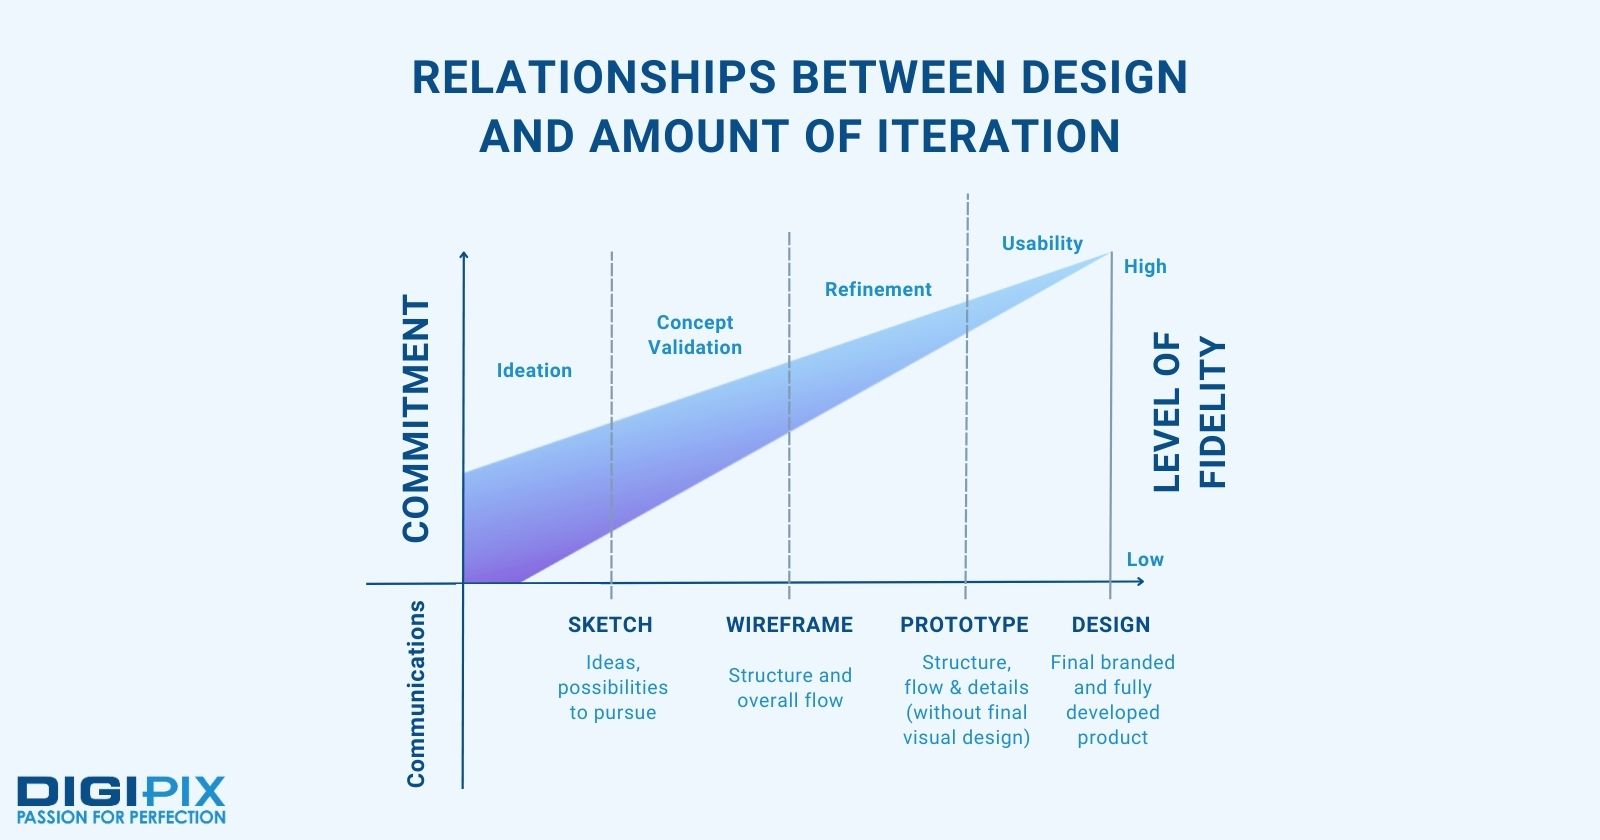 Relationships Between Design and Amount of Iteration